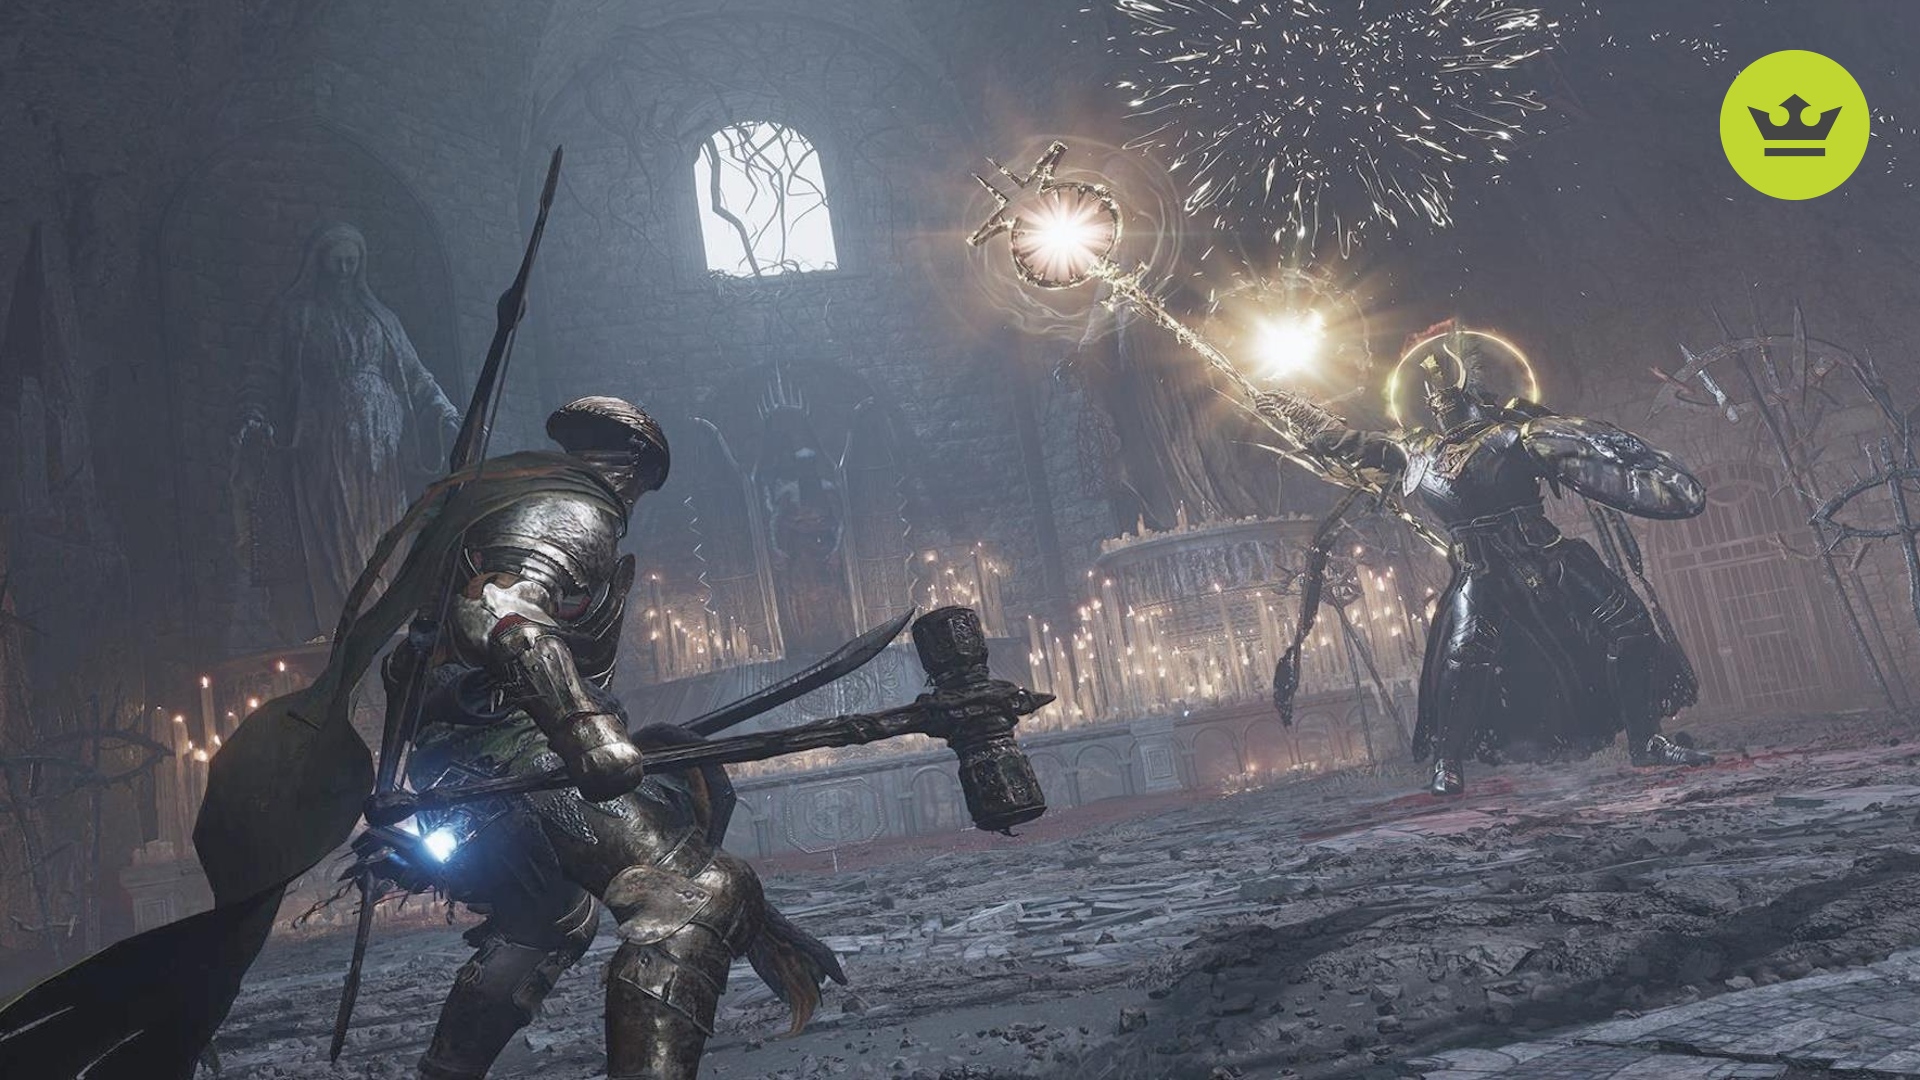 Sounds like Lords of the Fallen on Xbox will be janky at launch